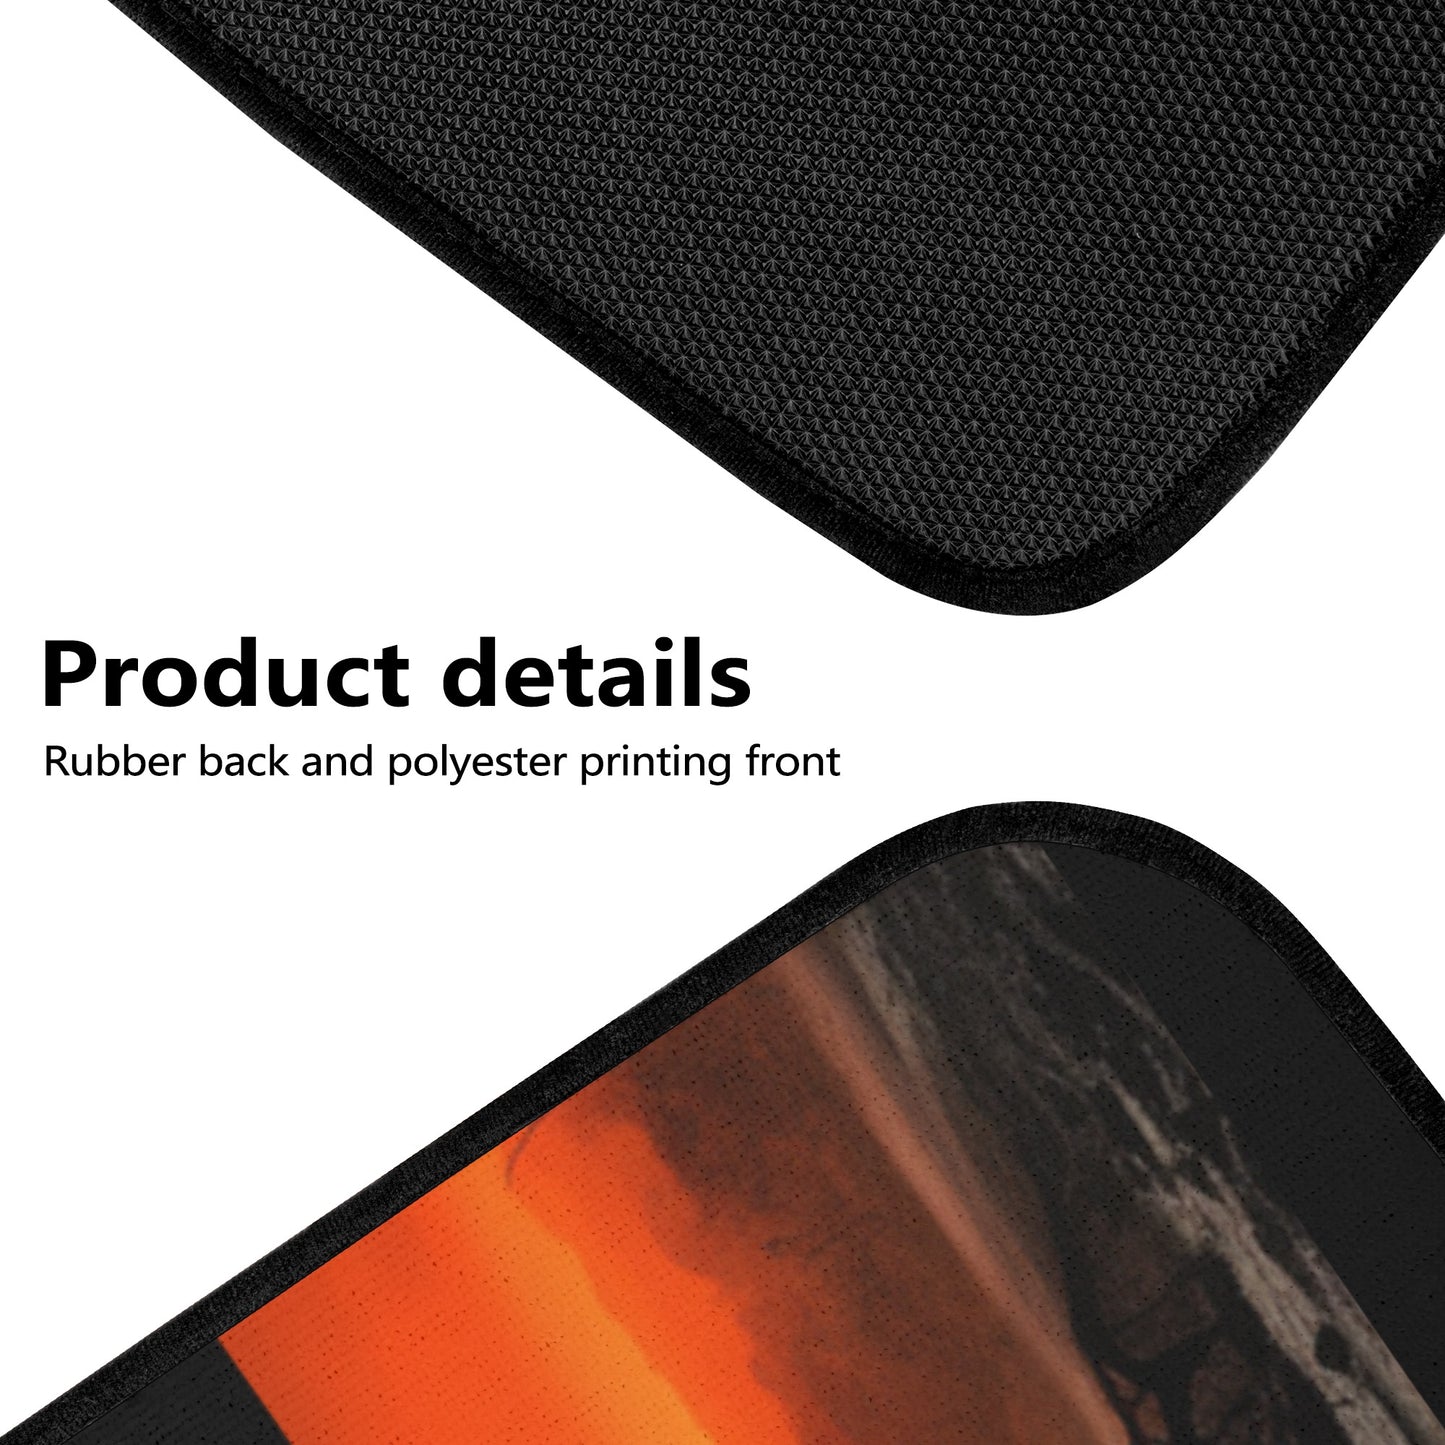 Neduz Crimson Sun Back and Front Car Floor Mats: Upgrade Your Car Interior with Style and Protection